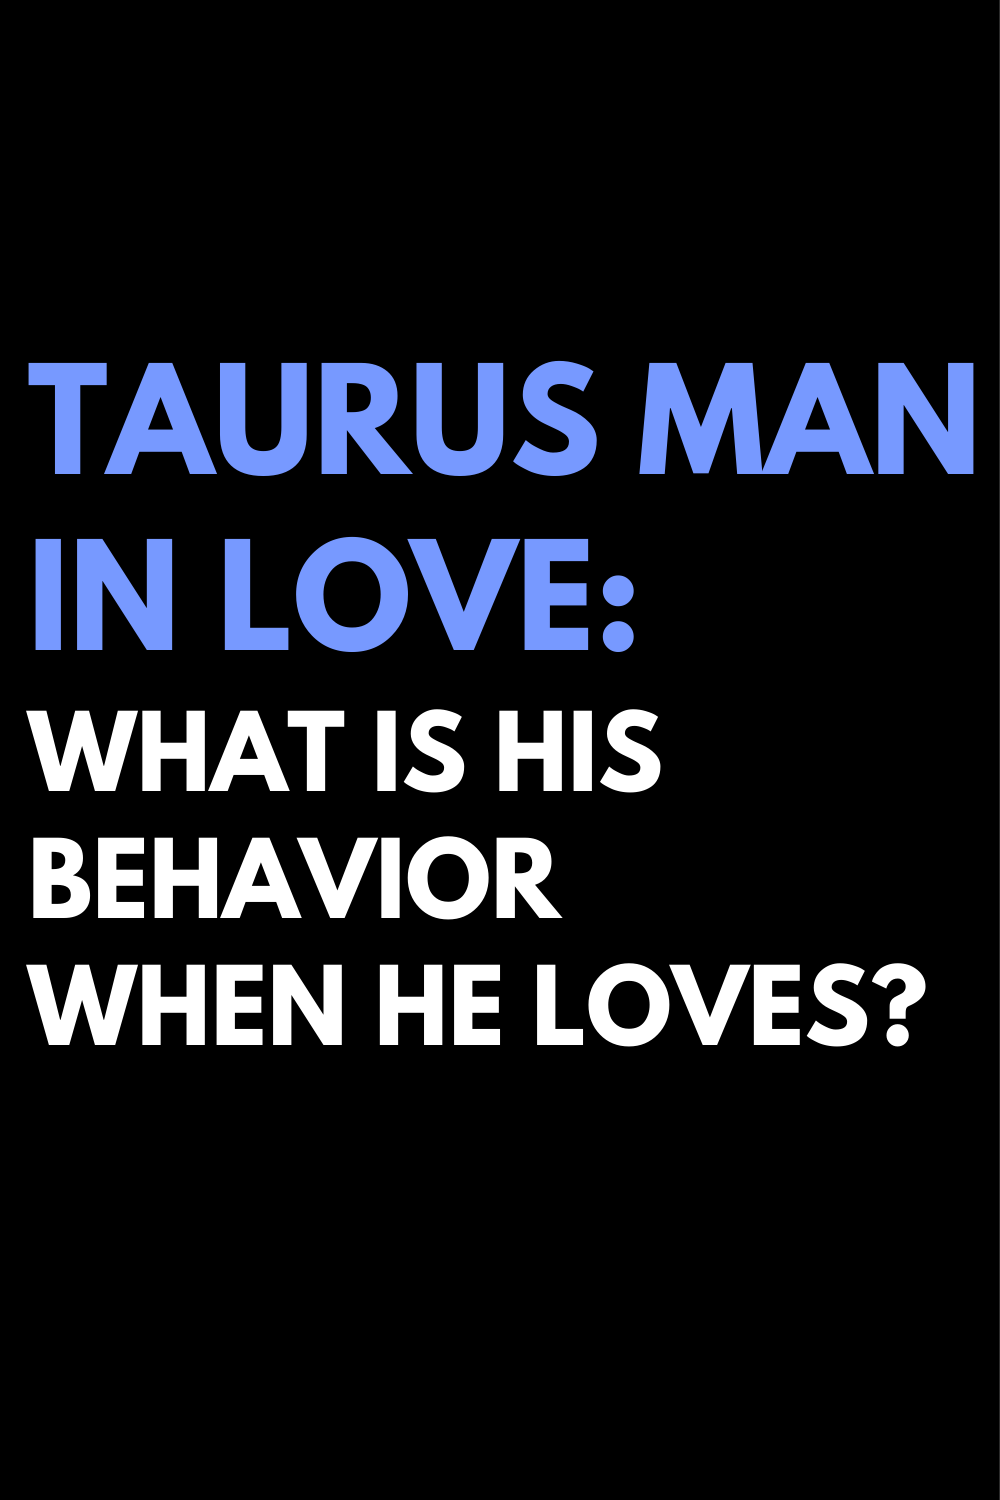 Taurus man in love: what is his behavior when he loves?